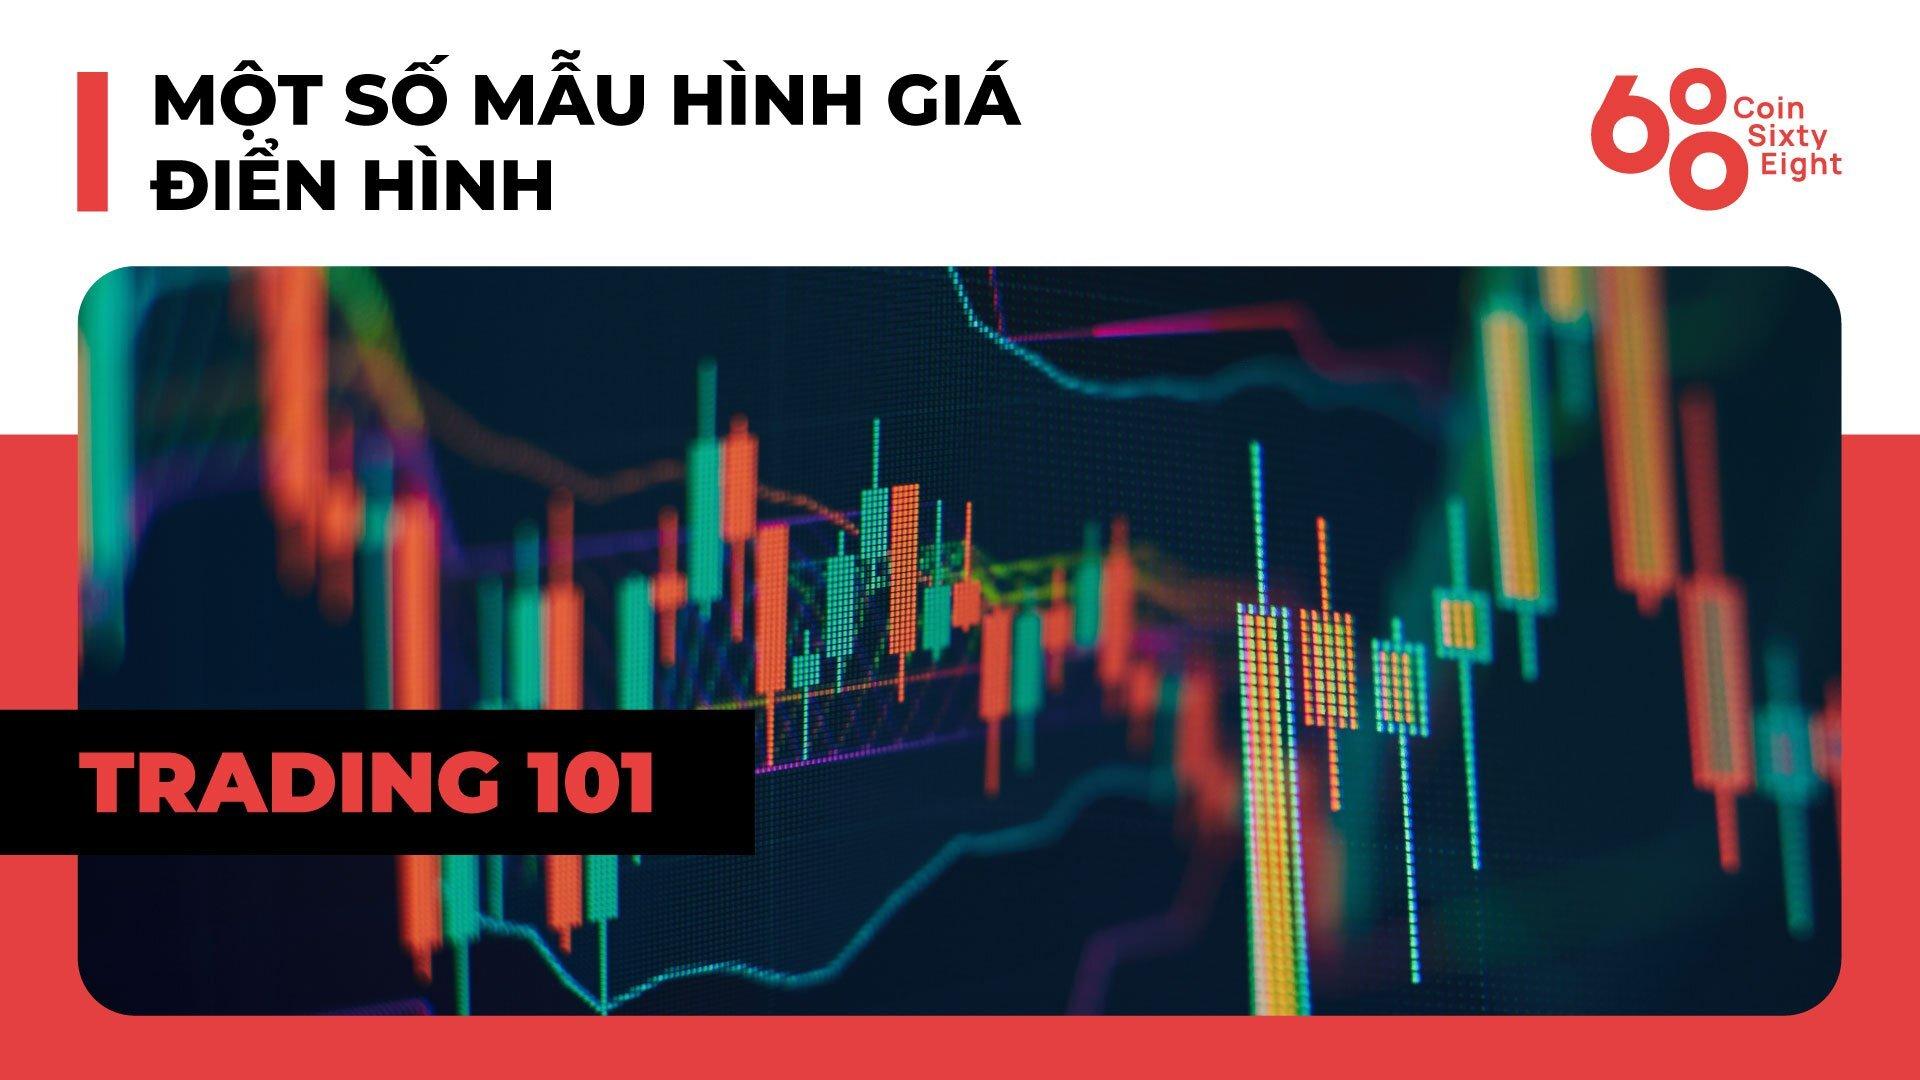 lop-giao-dich-101-price-action-trading-phan-7-mot-so-mau-hinh-gia-dien-hinh-trong-trading